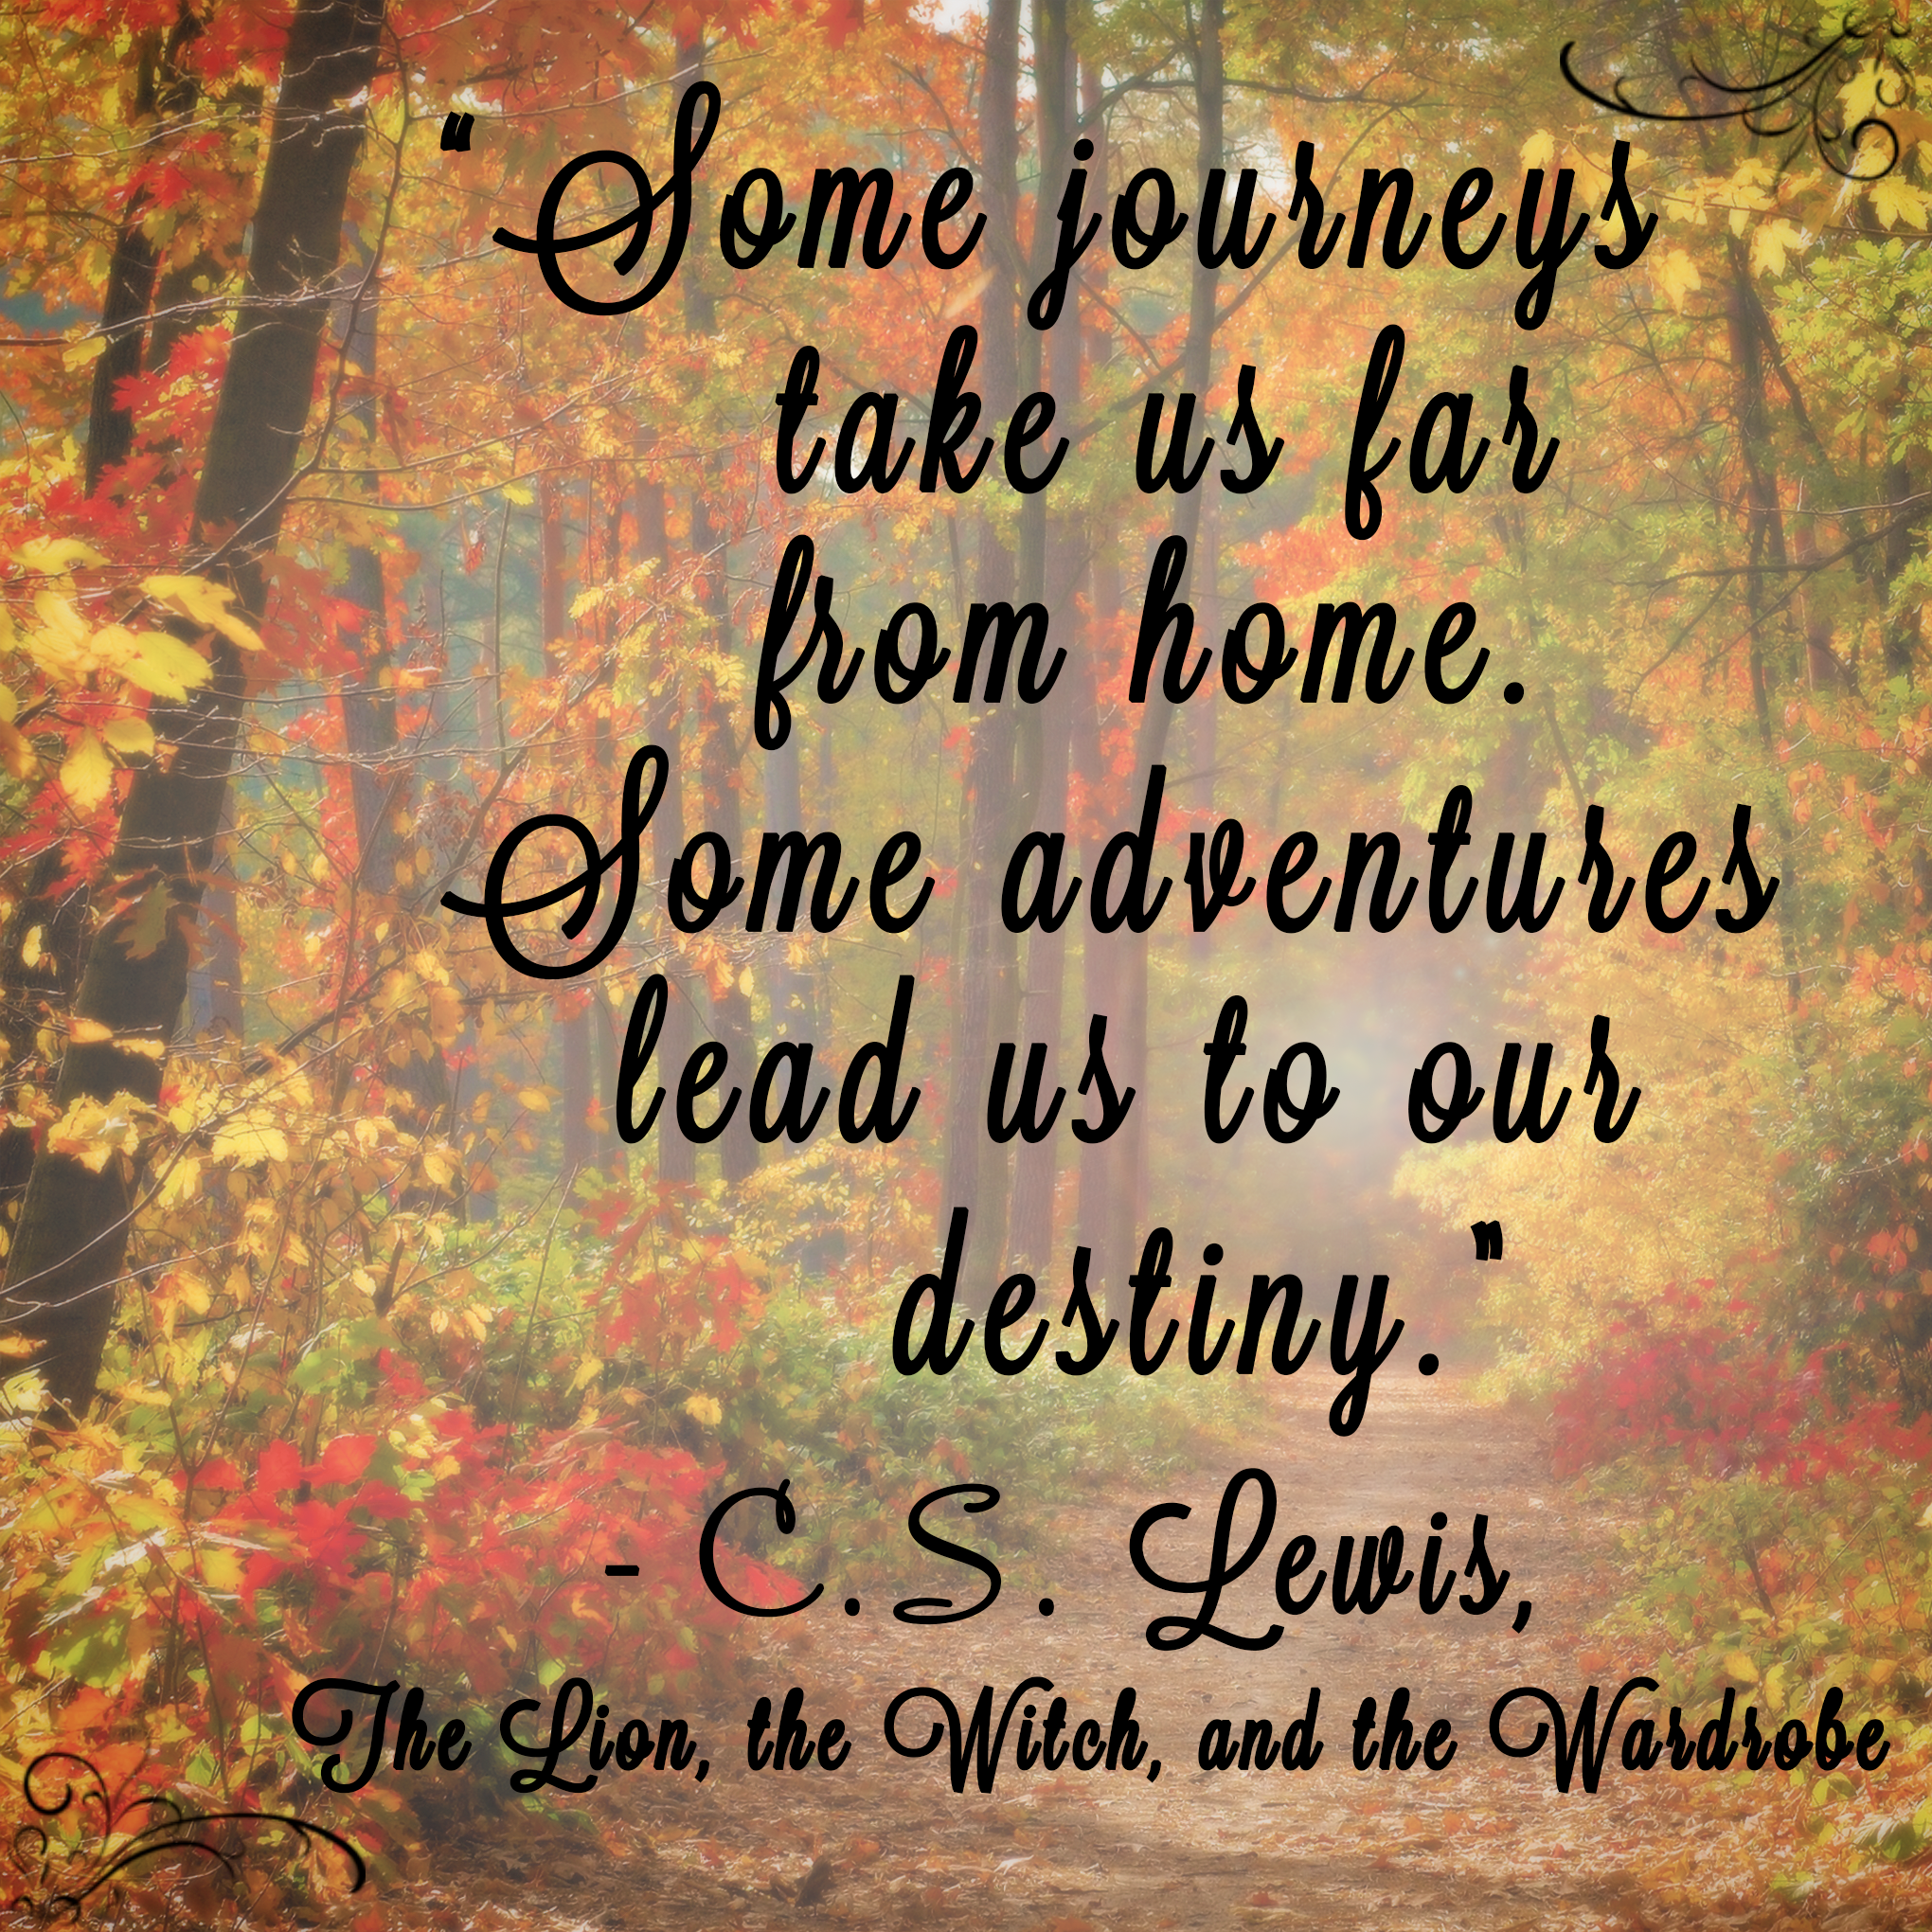 “Some journeys take us far from home. Some adventures lead us to our destiny.” –